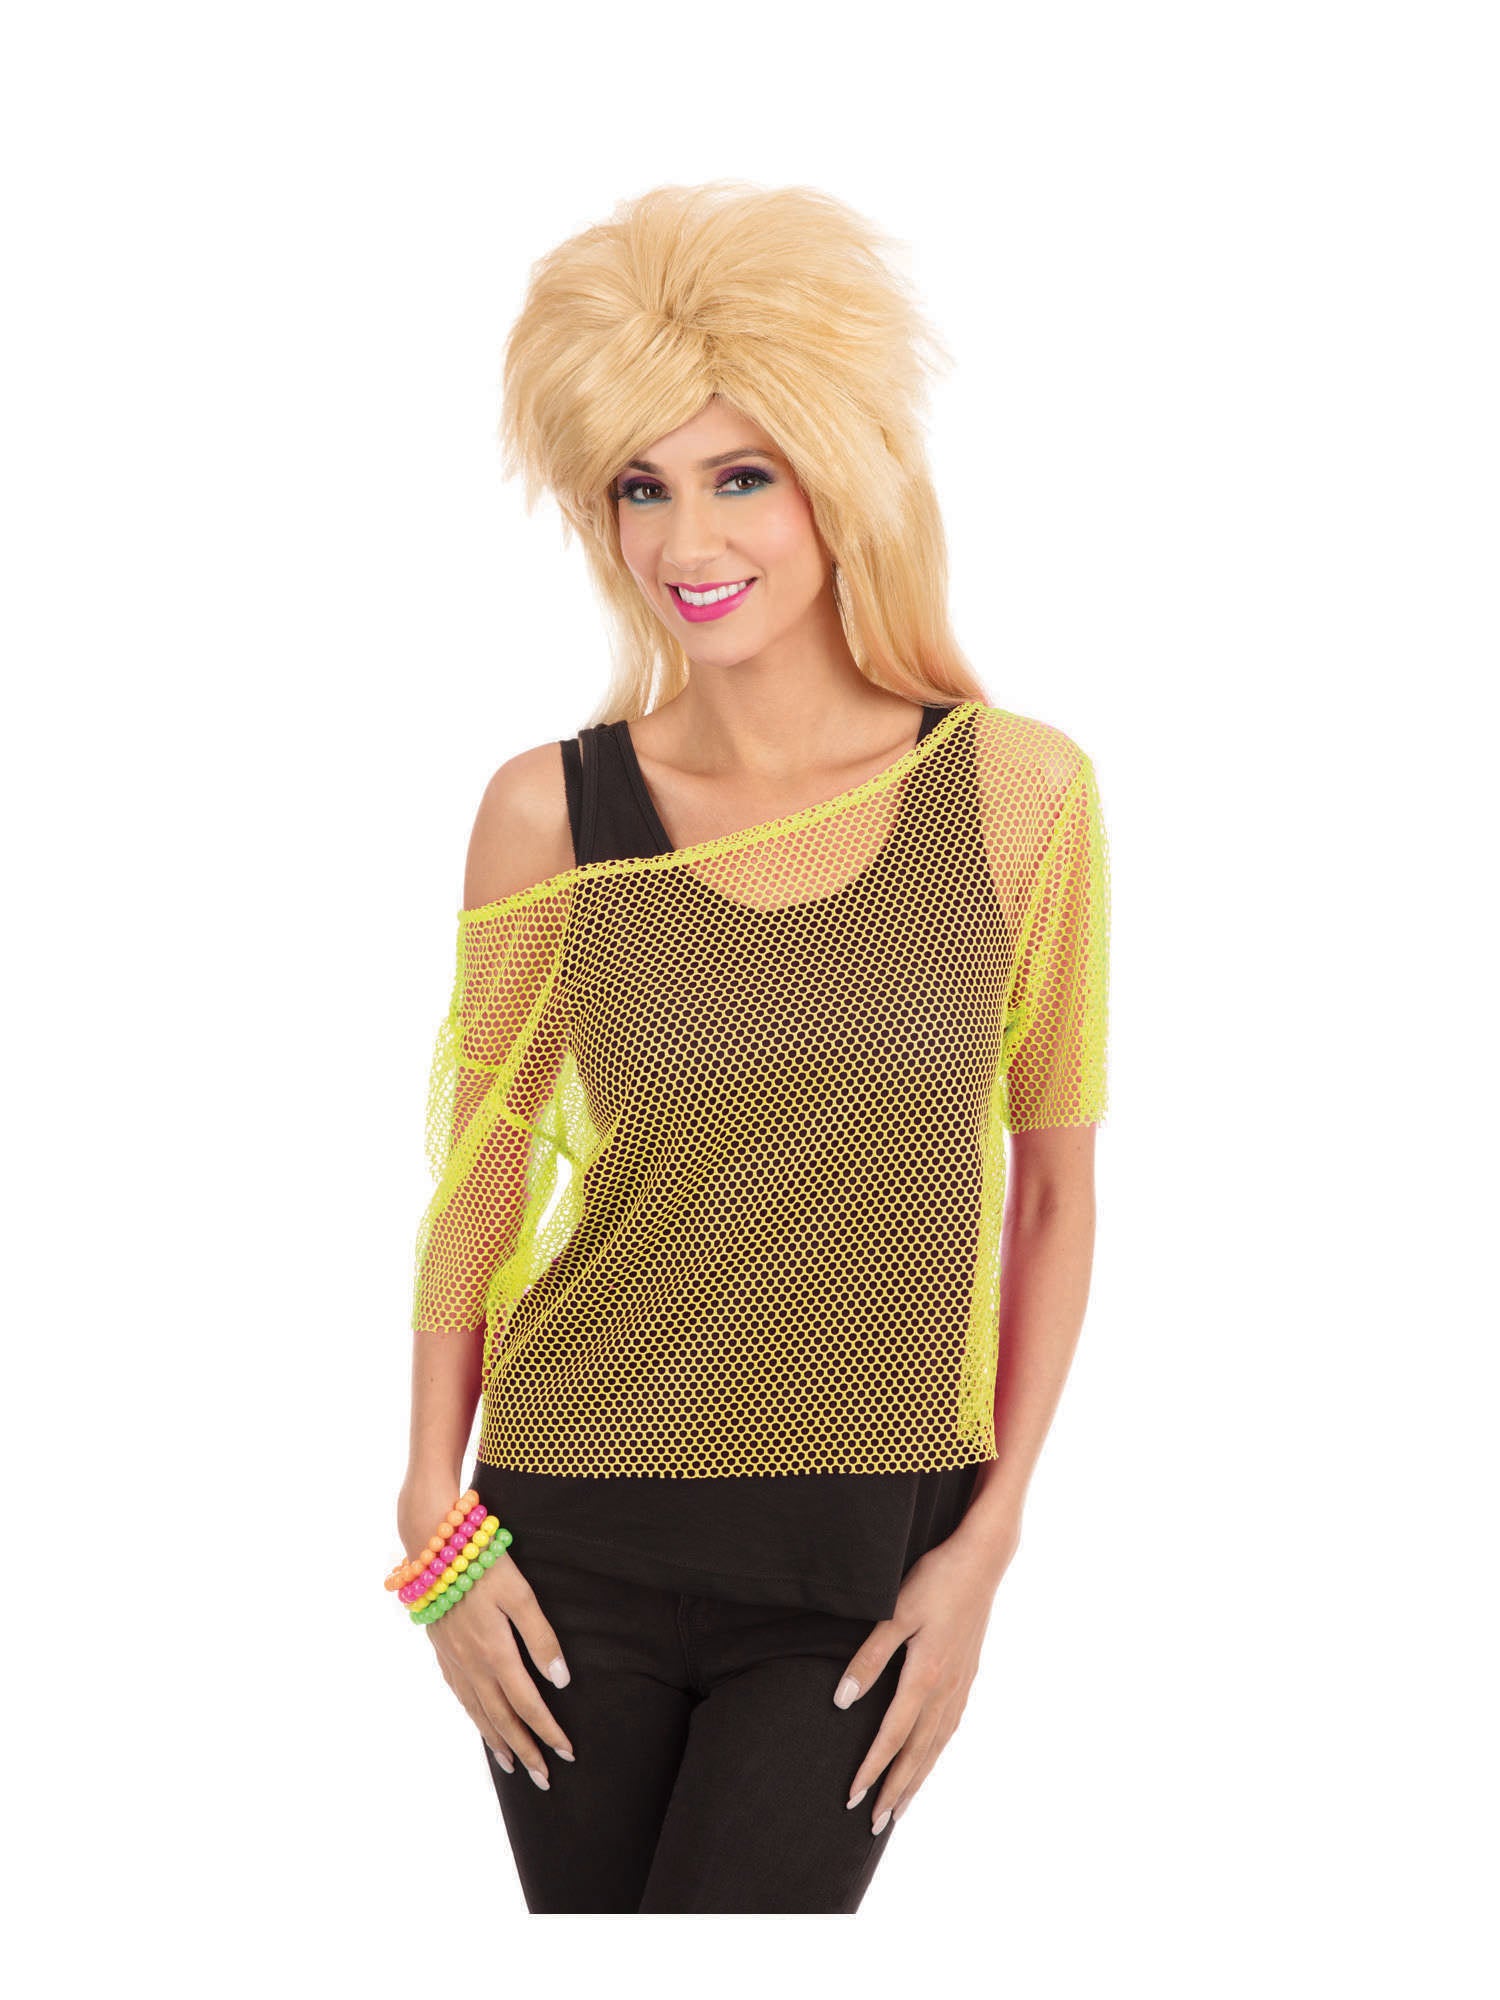 1980s, Yellow, Generic, Adult Costume, Standard, Front